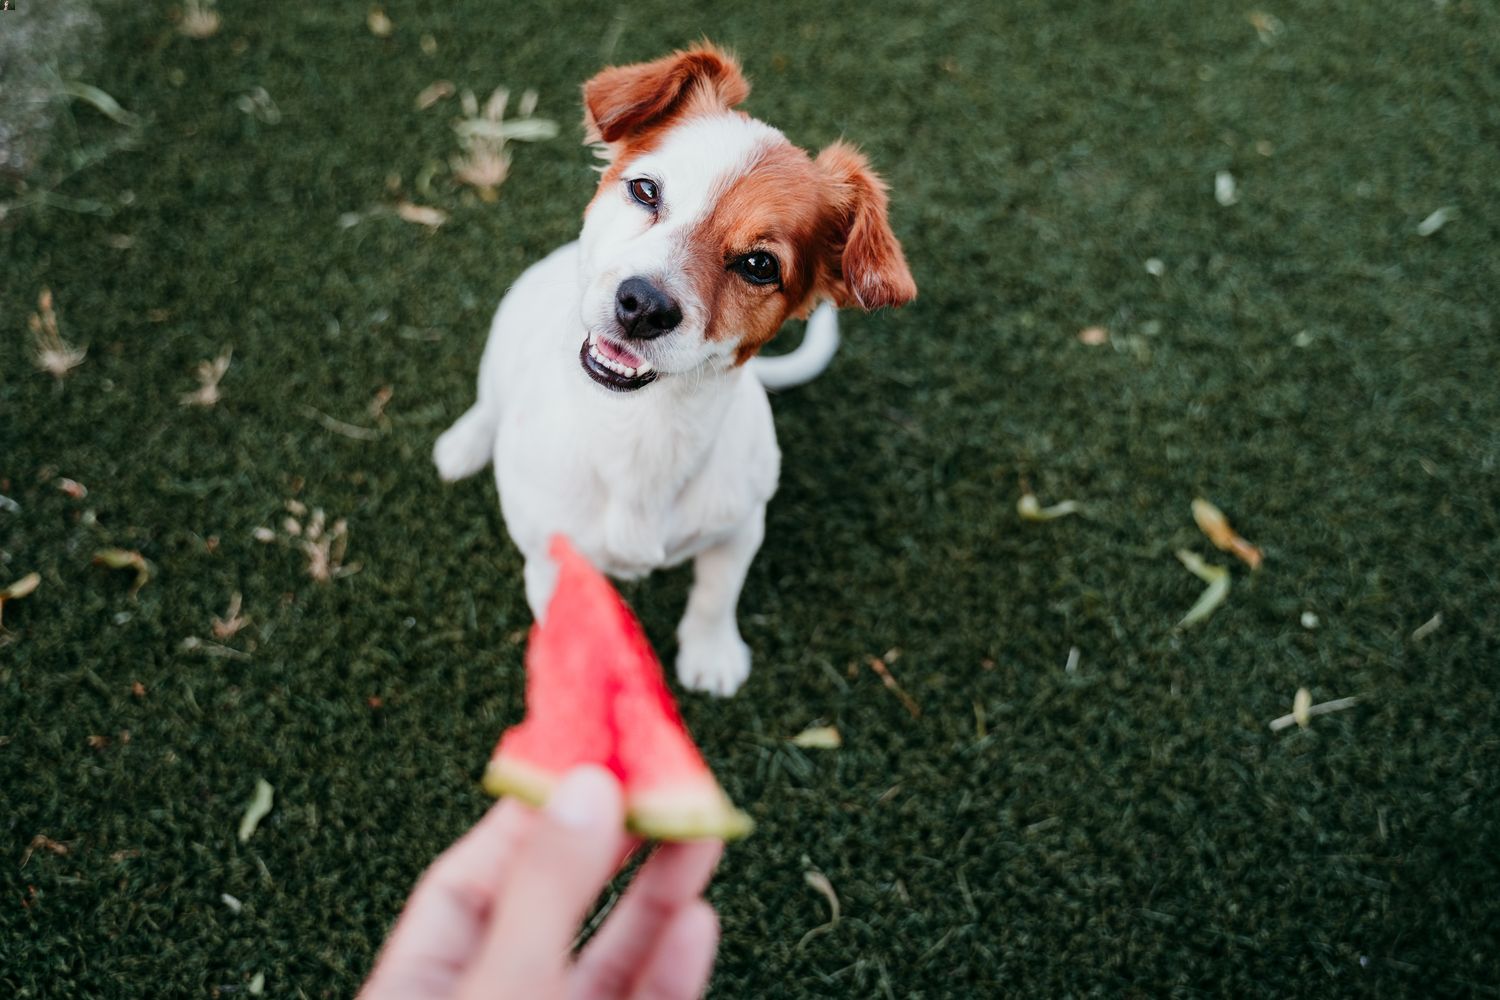 Can dogs eat watermelon? Important considerations before you feed.